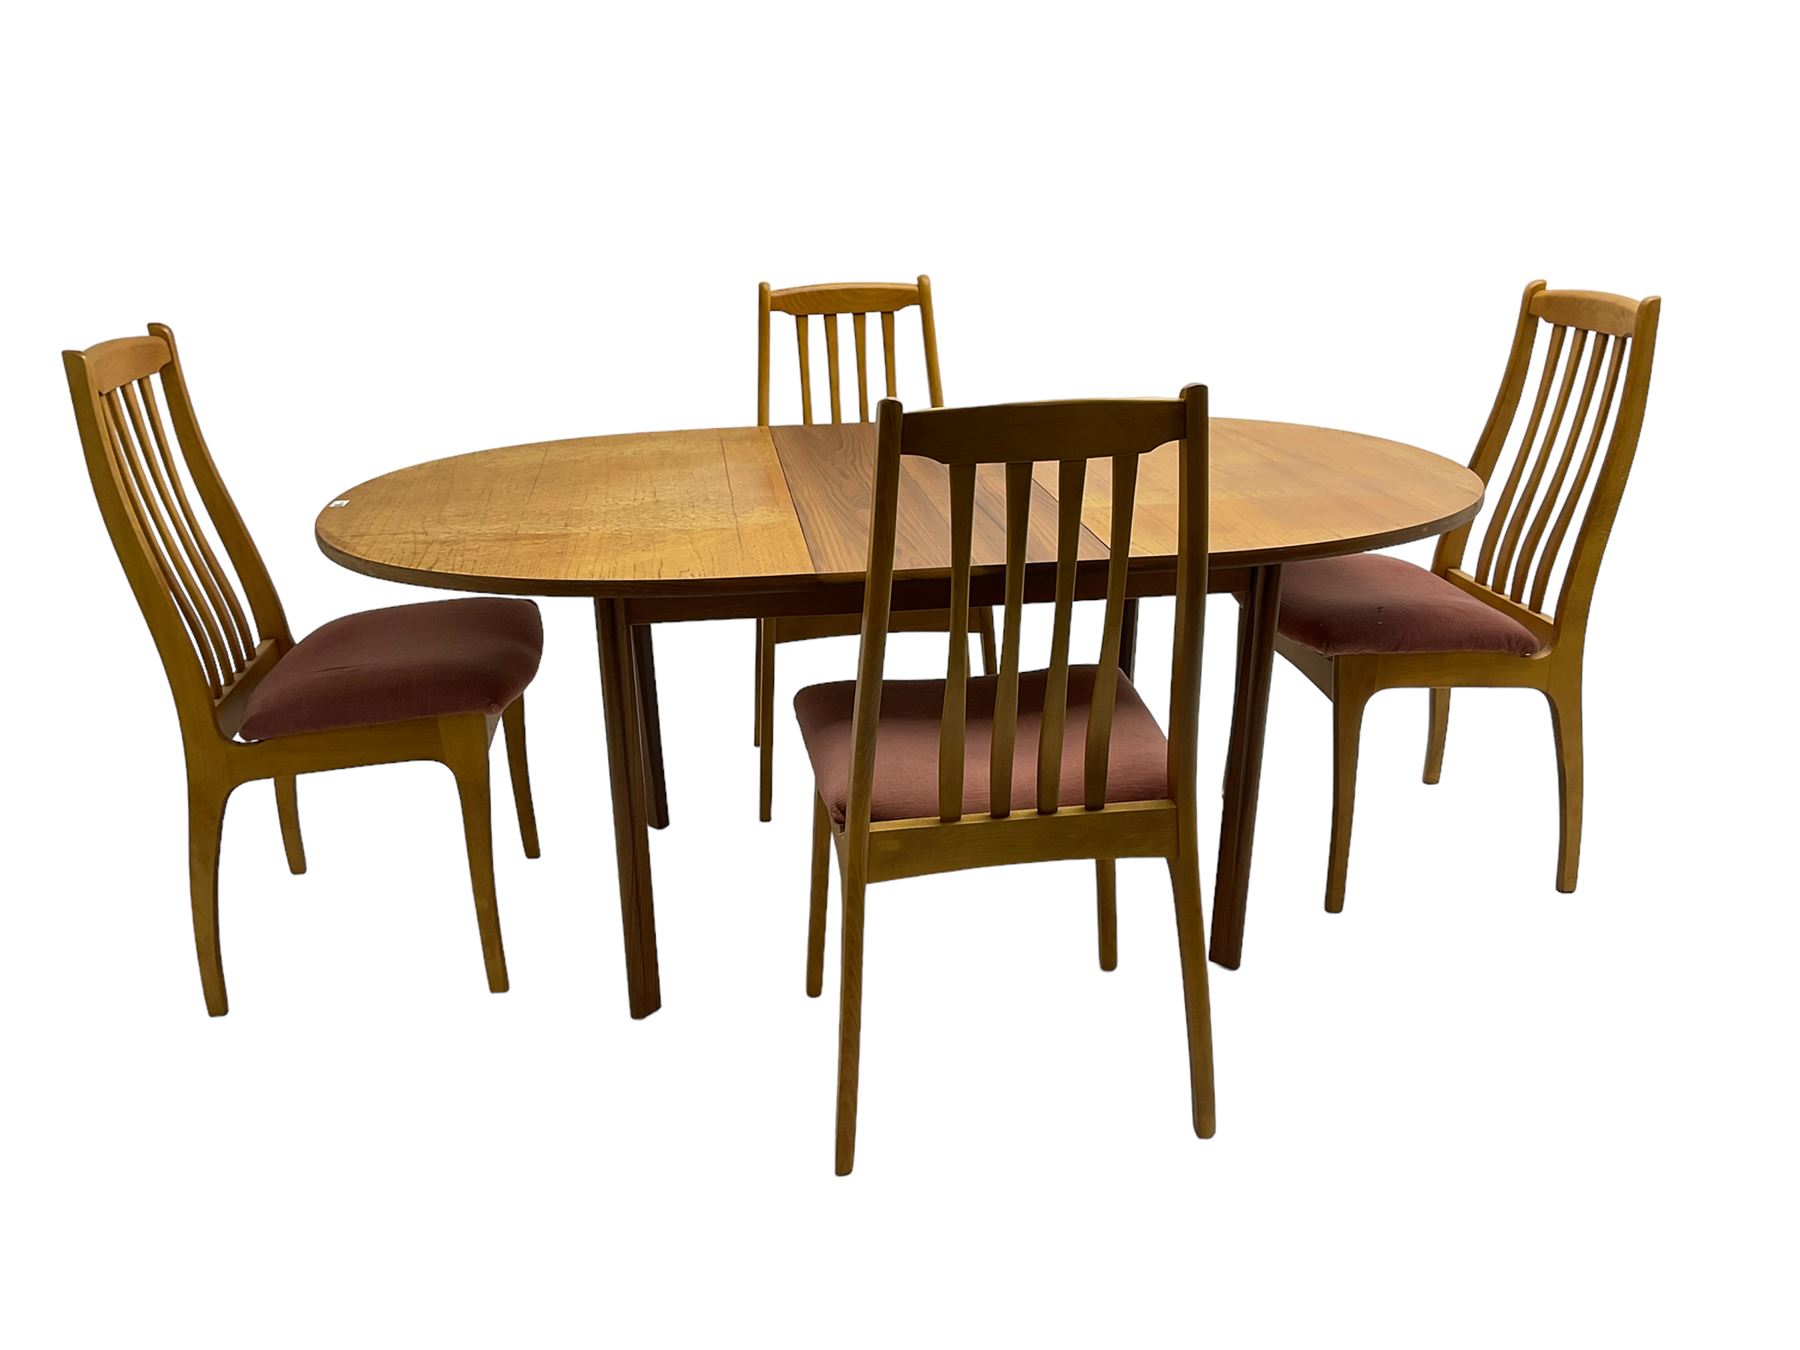 Portwood Furniture - mid-20th century teak extending dining table - Image 5 of 6